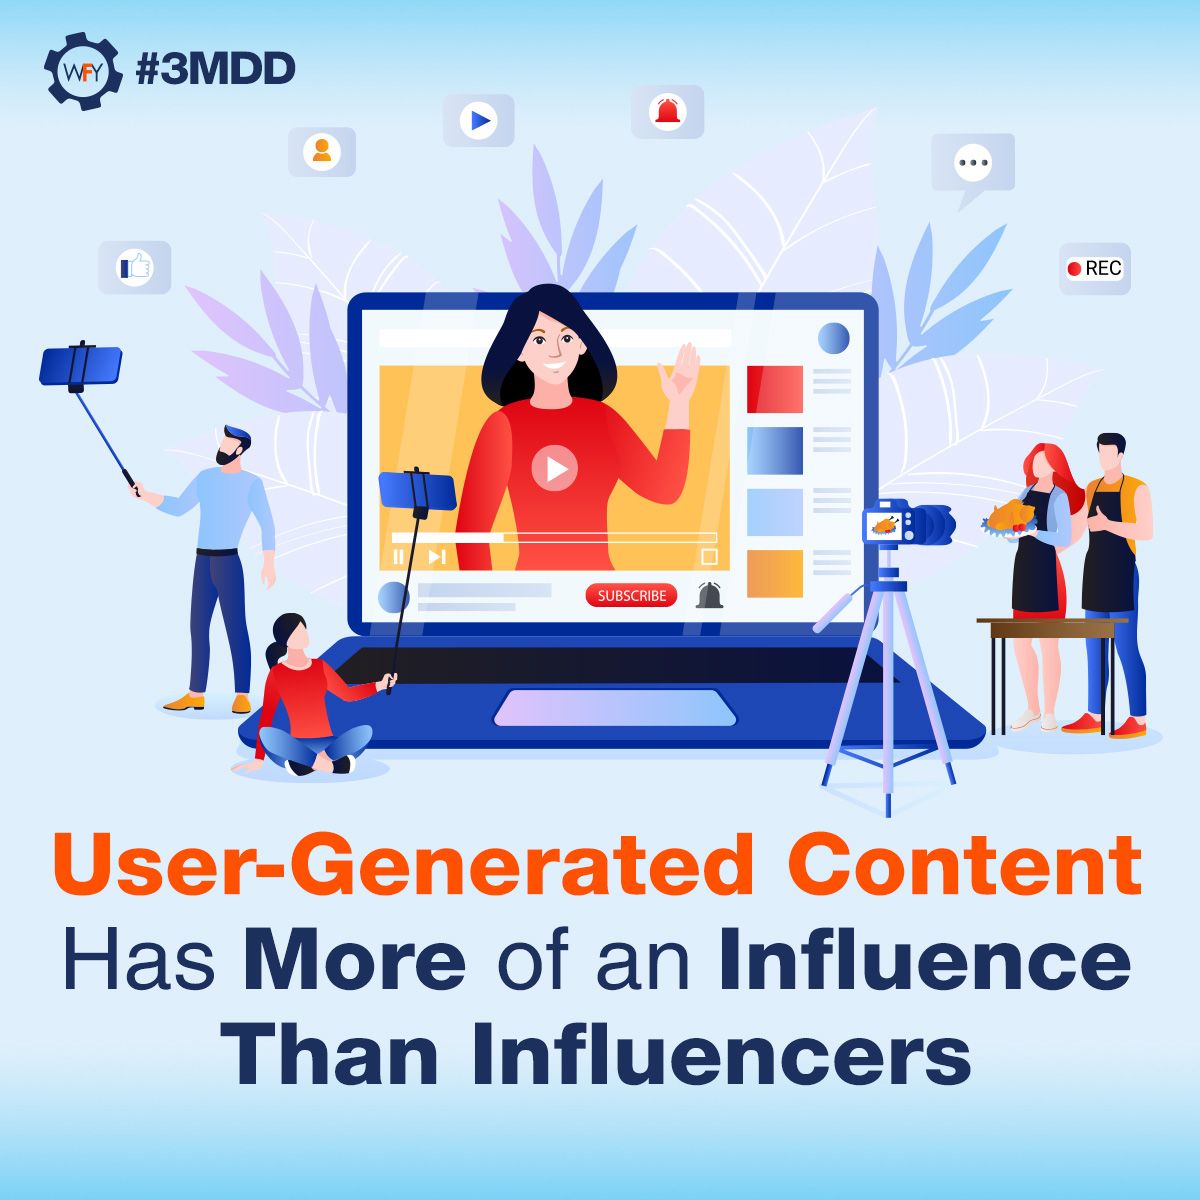 User-Generated Content Has More of an Influence Than Influencers